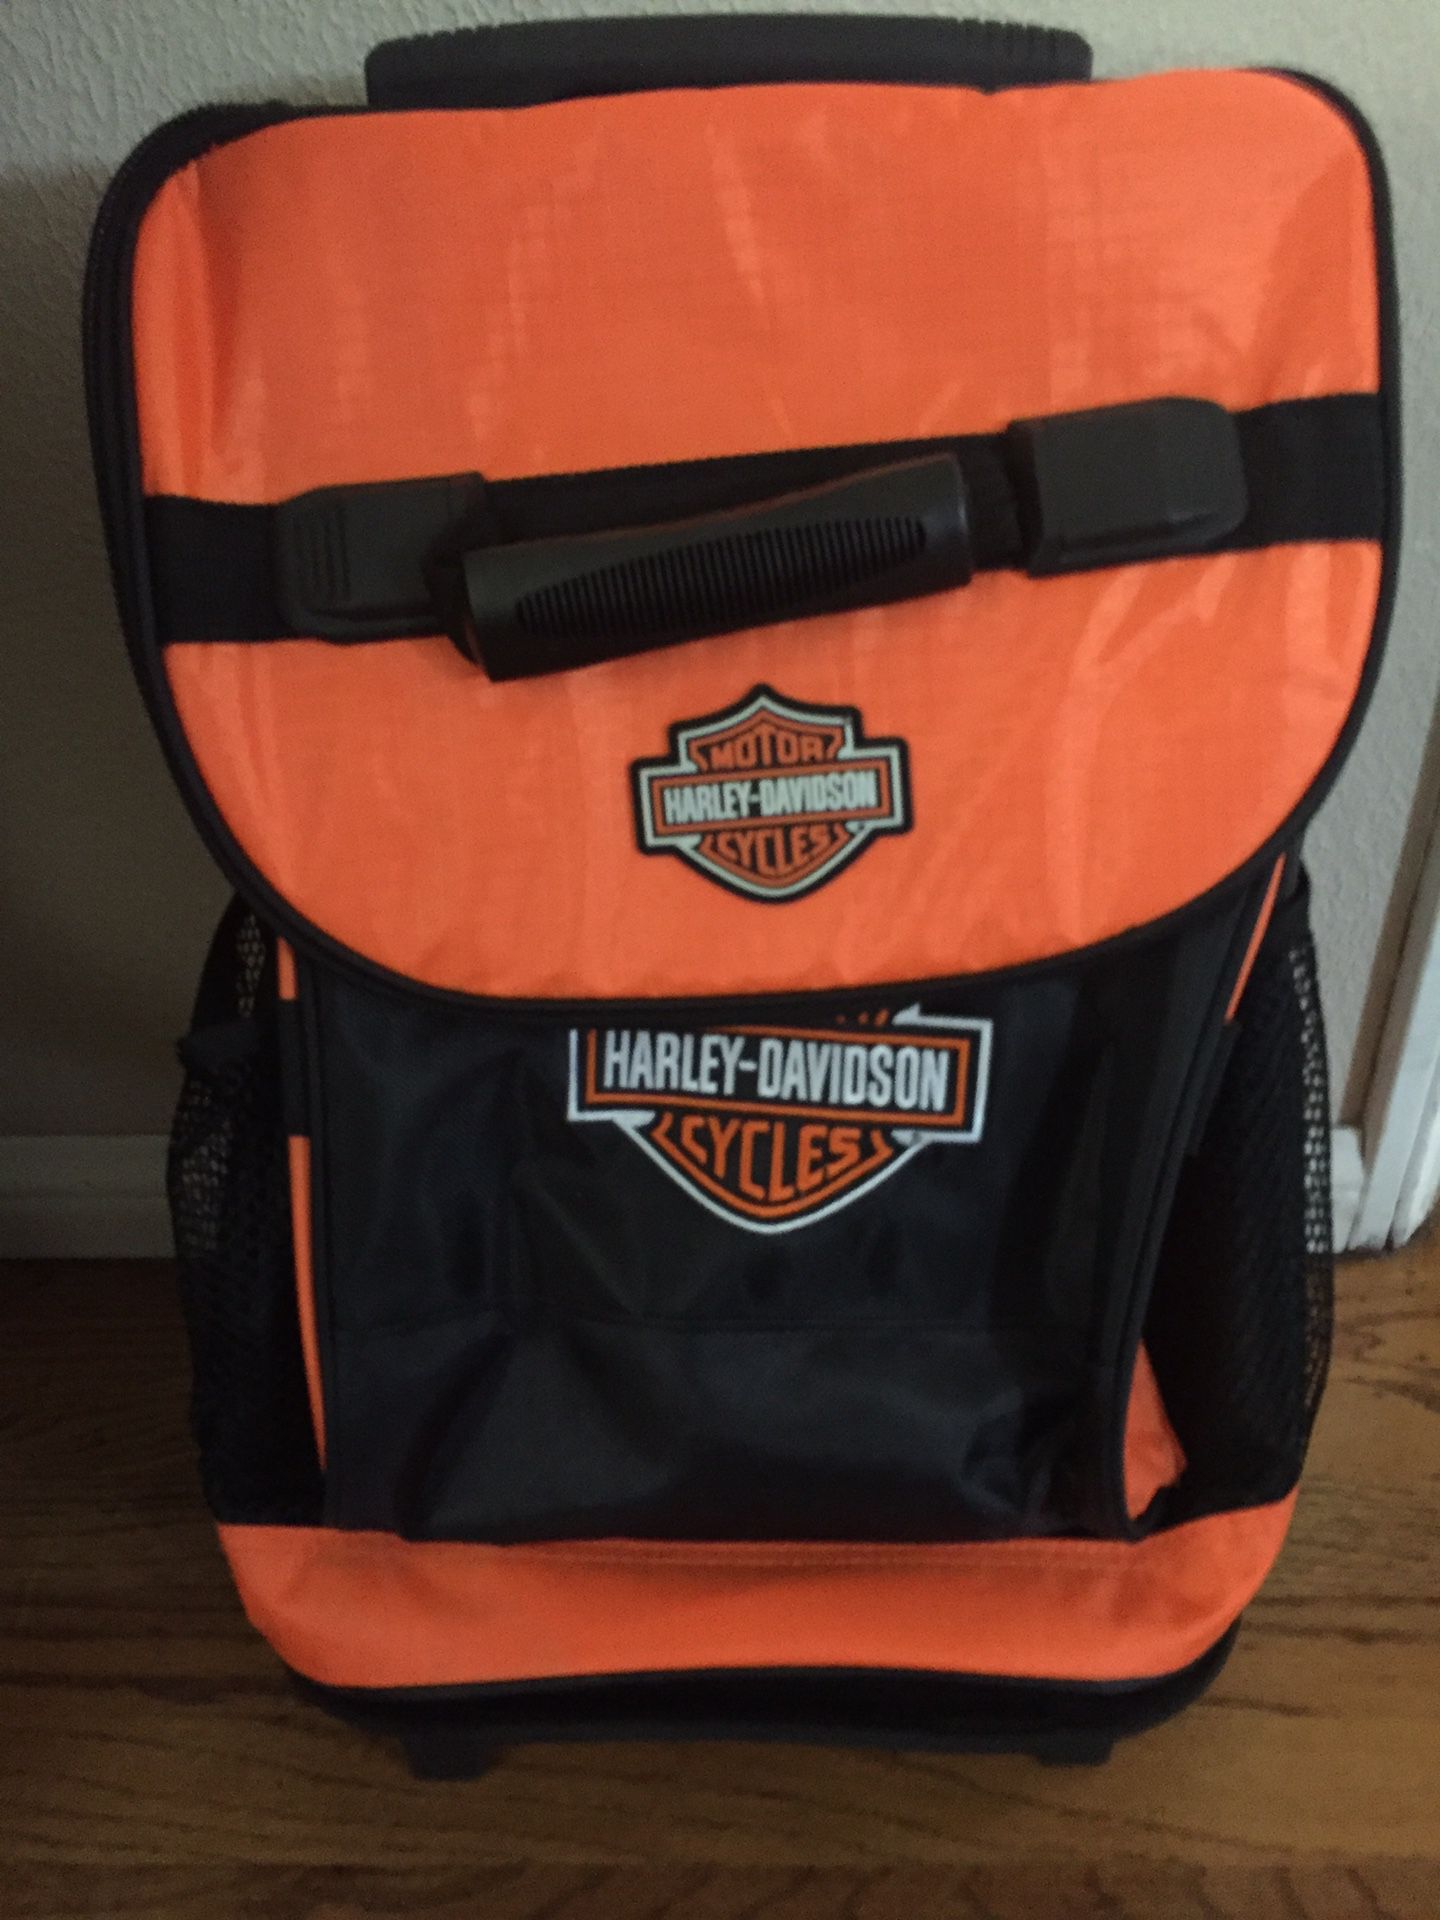 Harley Davidson HD rolling cooler/ice chest